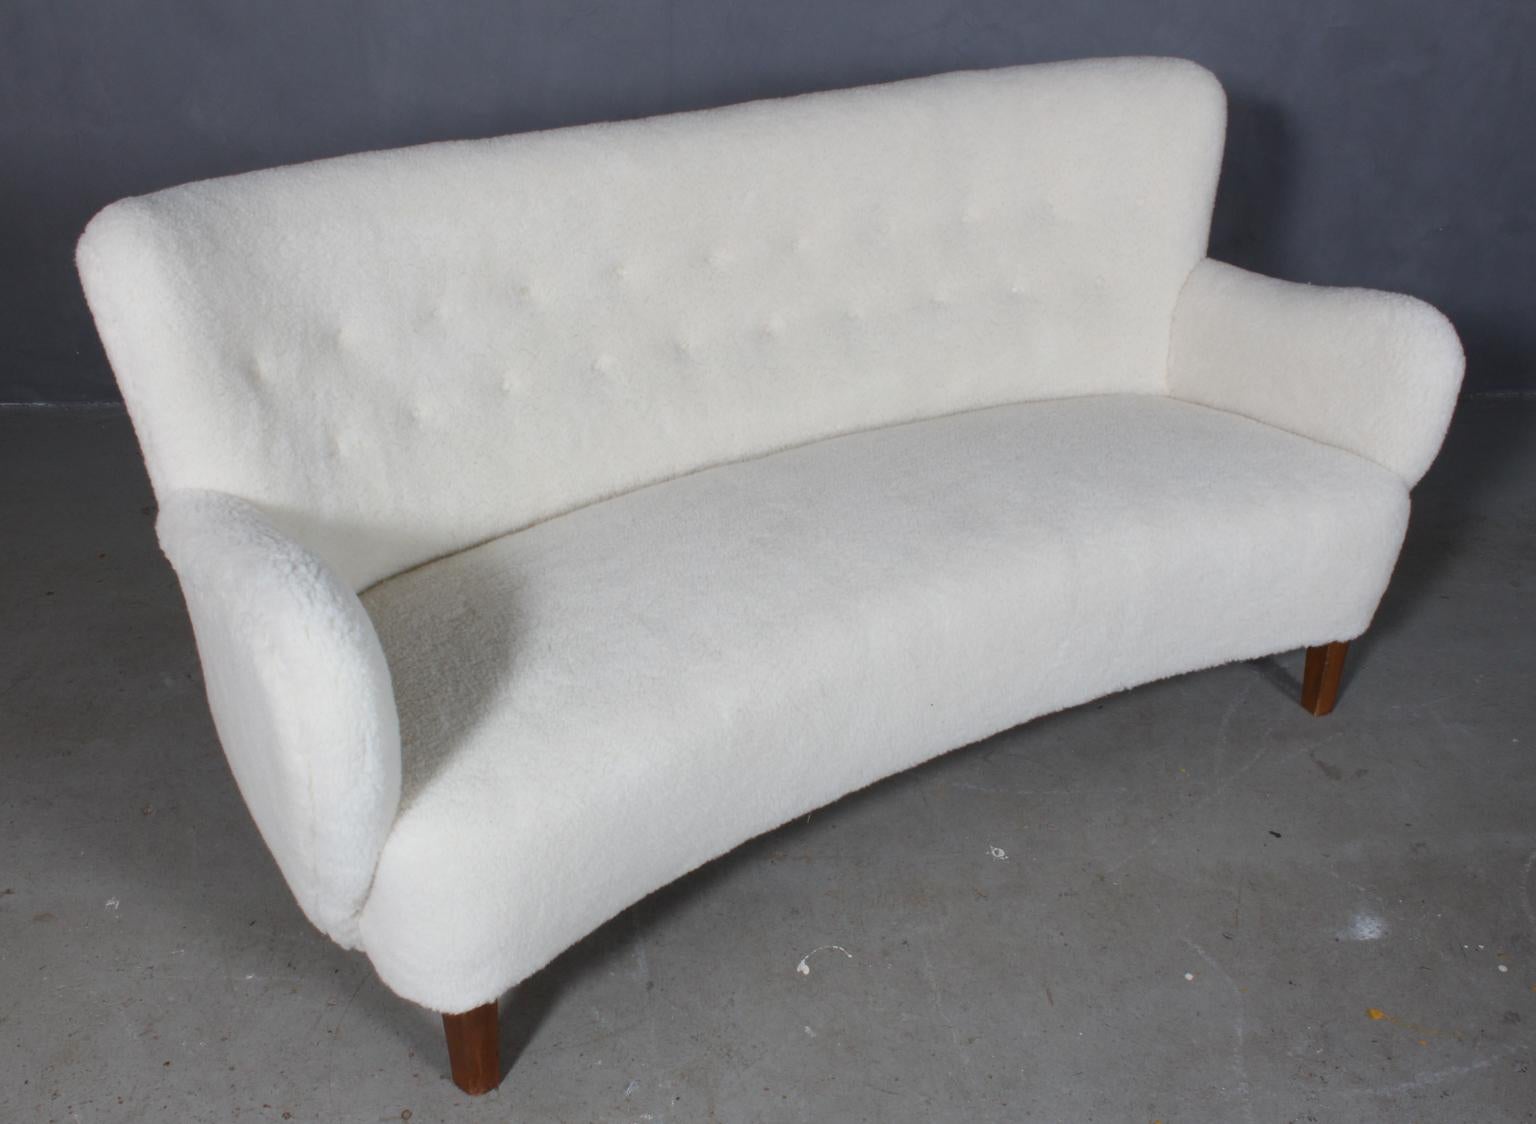 Danish cabinetmaker three-seat sofa new upholstered with lambwool.

Legs of beech

Made in the 1940s.